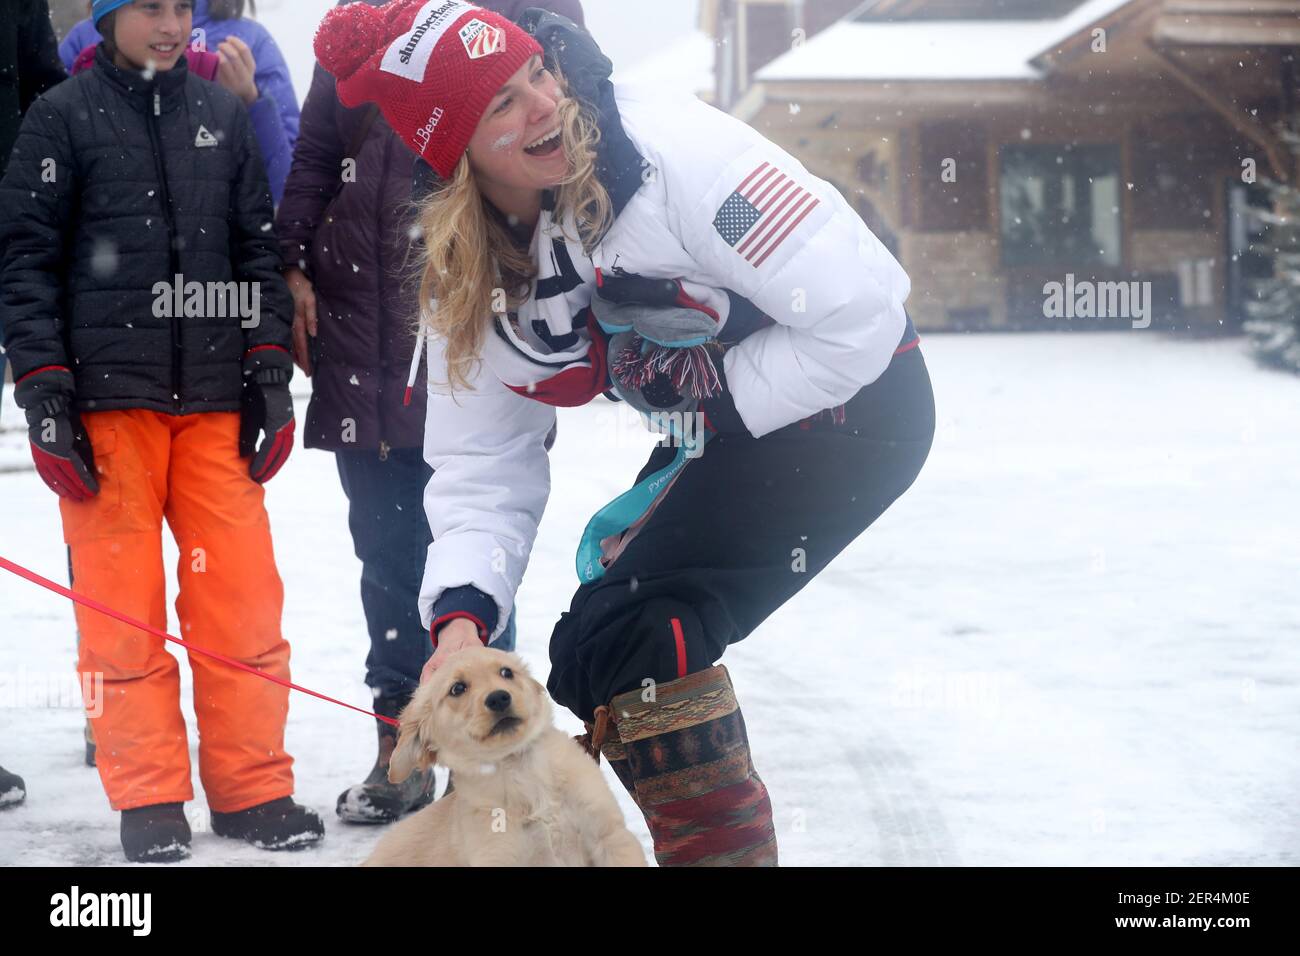 Jessie Diggins, Team USA Olympic gold medalist cross country skier, bends down to greet Lily, a 12 week-old golden retriever, as hundreds brave snowy, blustery weather to honor Diggins with a parade on Saturday, April 14, 2018, in Stillwater, Minn. (Photo by David Joles/Minneapolis Star Tribune/TNS/Sipa USA) Stock Photo